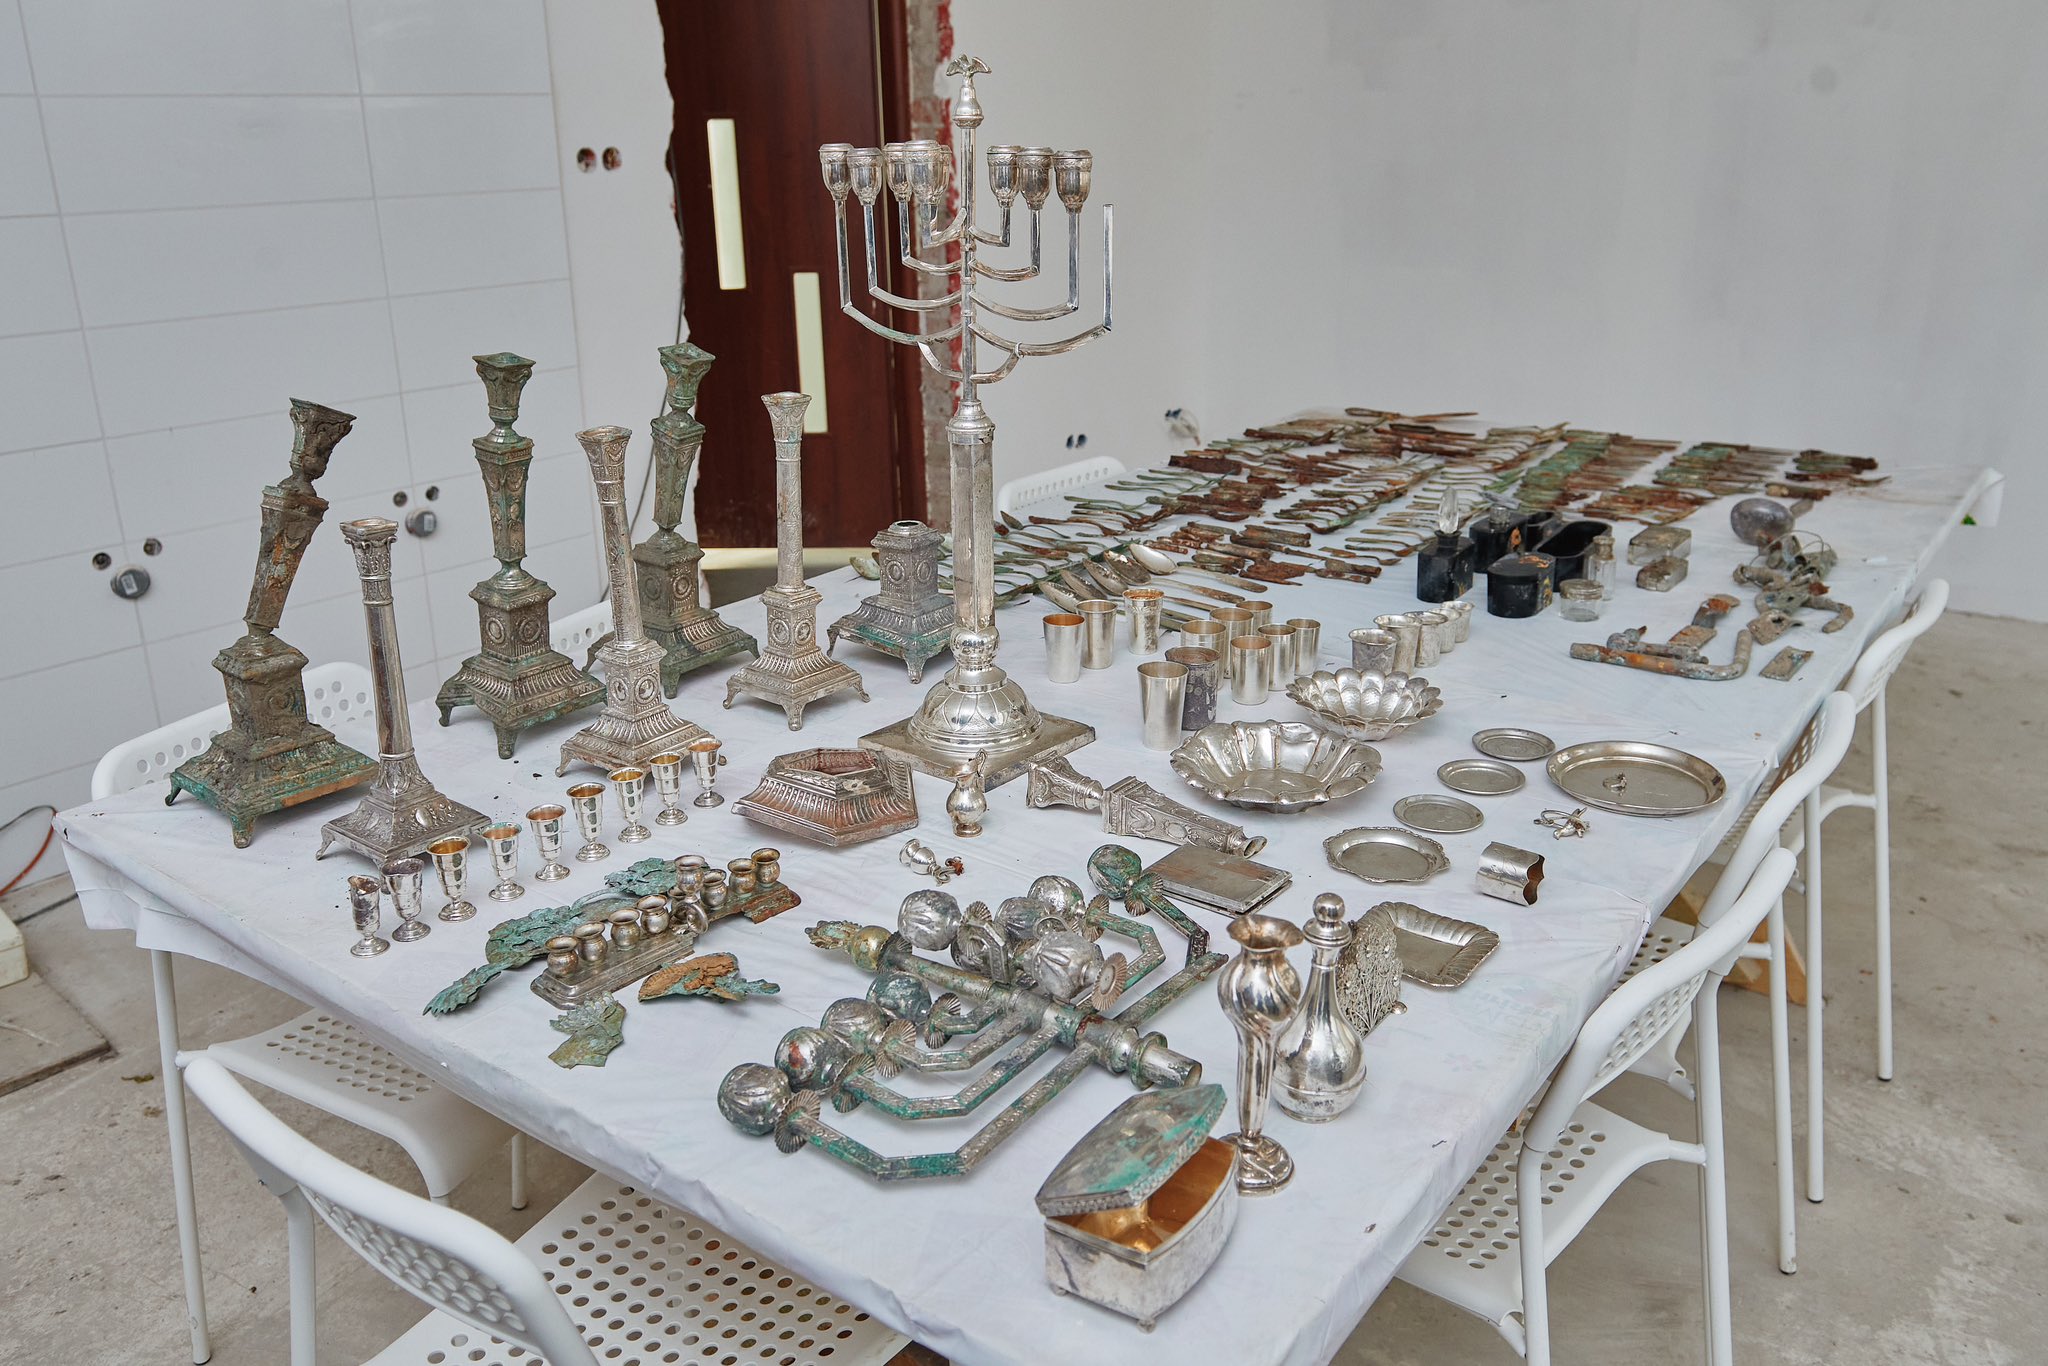 Jewish treasure from the beginning of the Nazi invasion of Poland found in Lodz